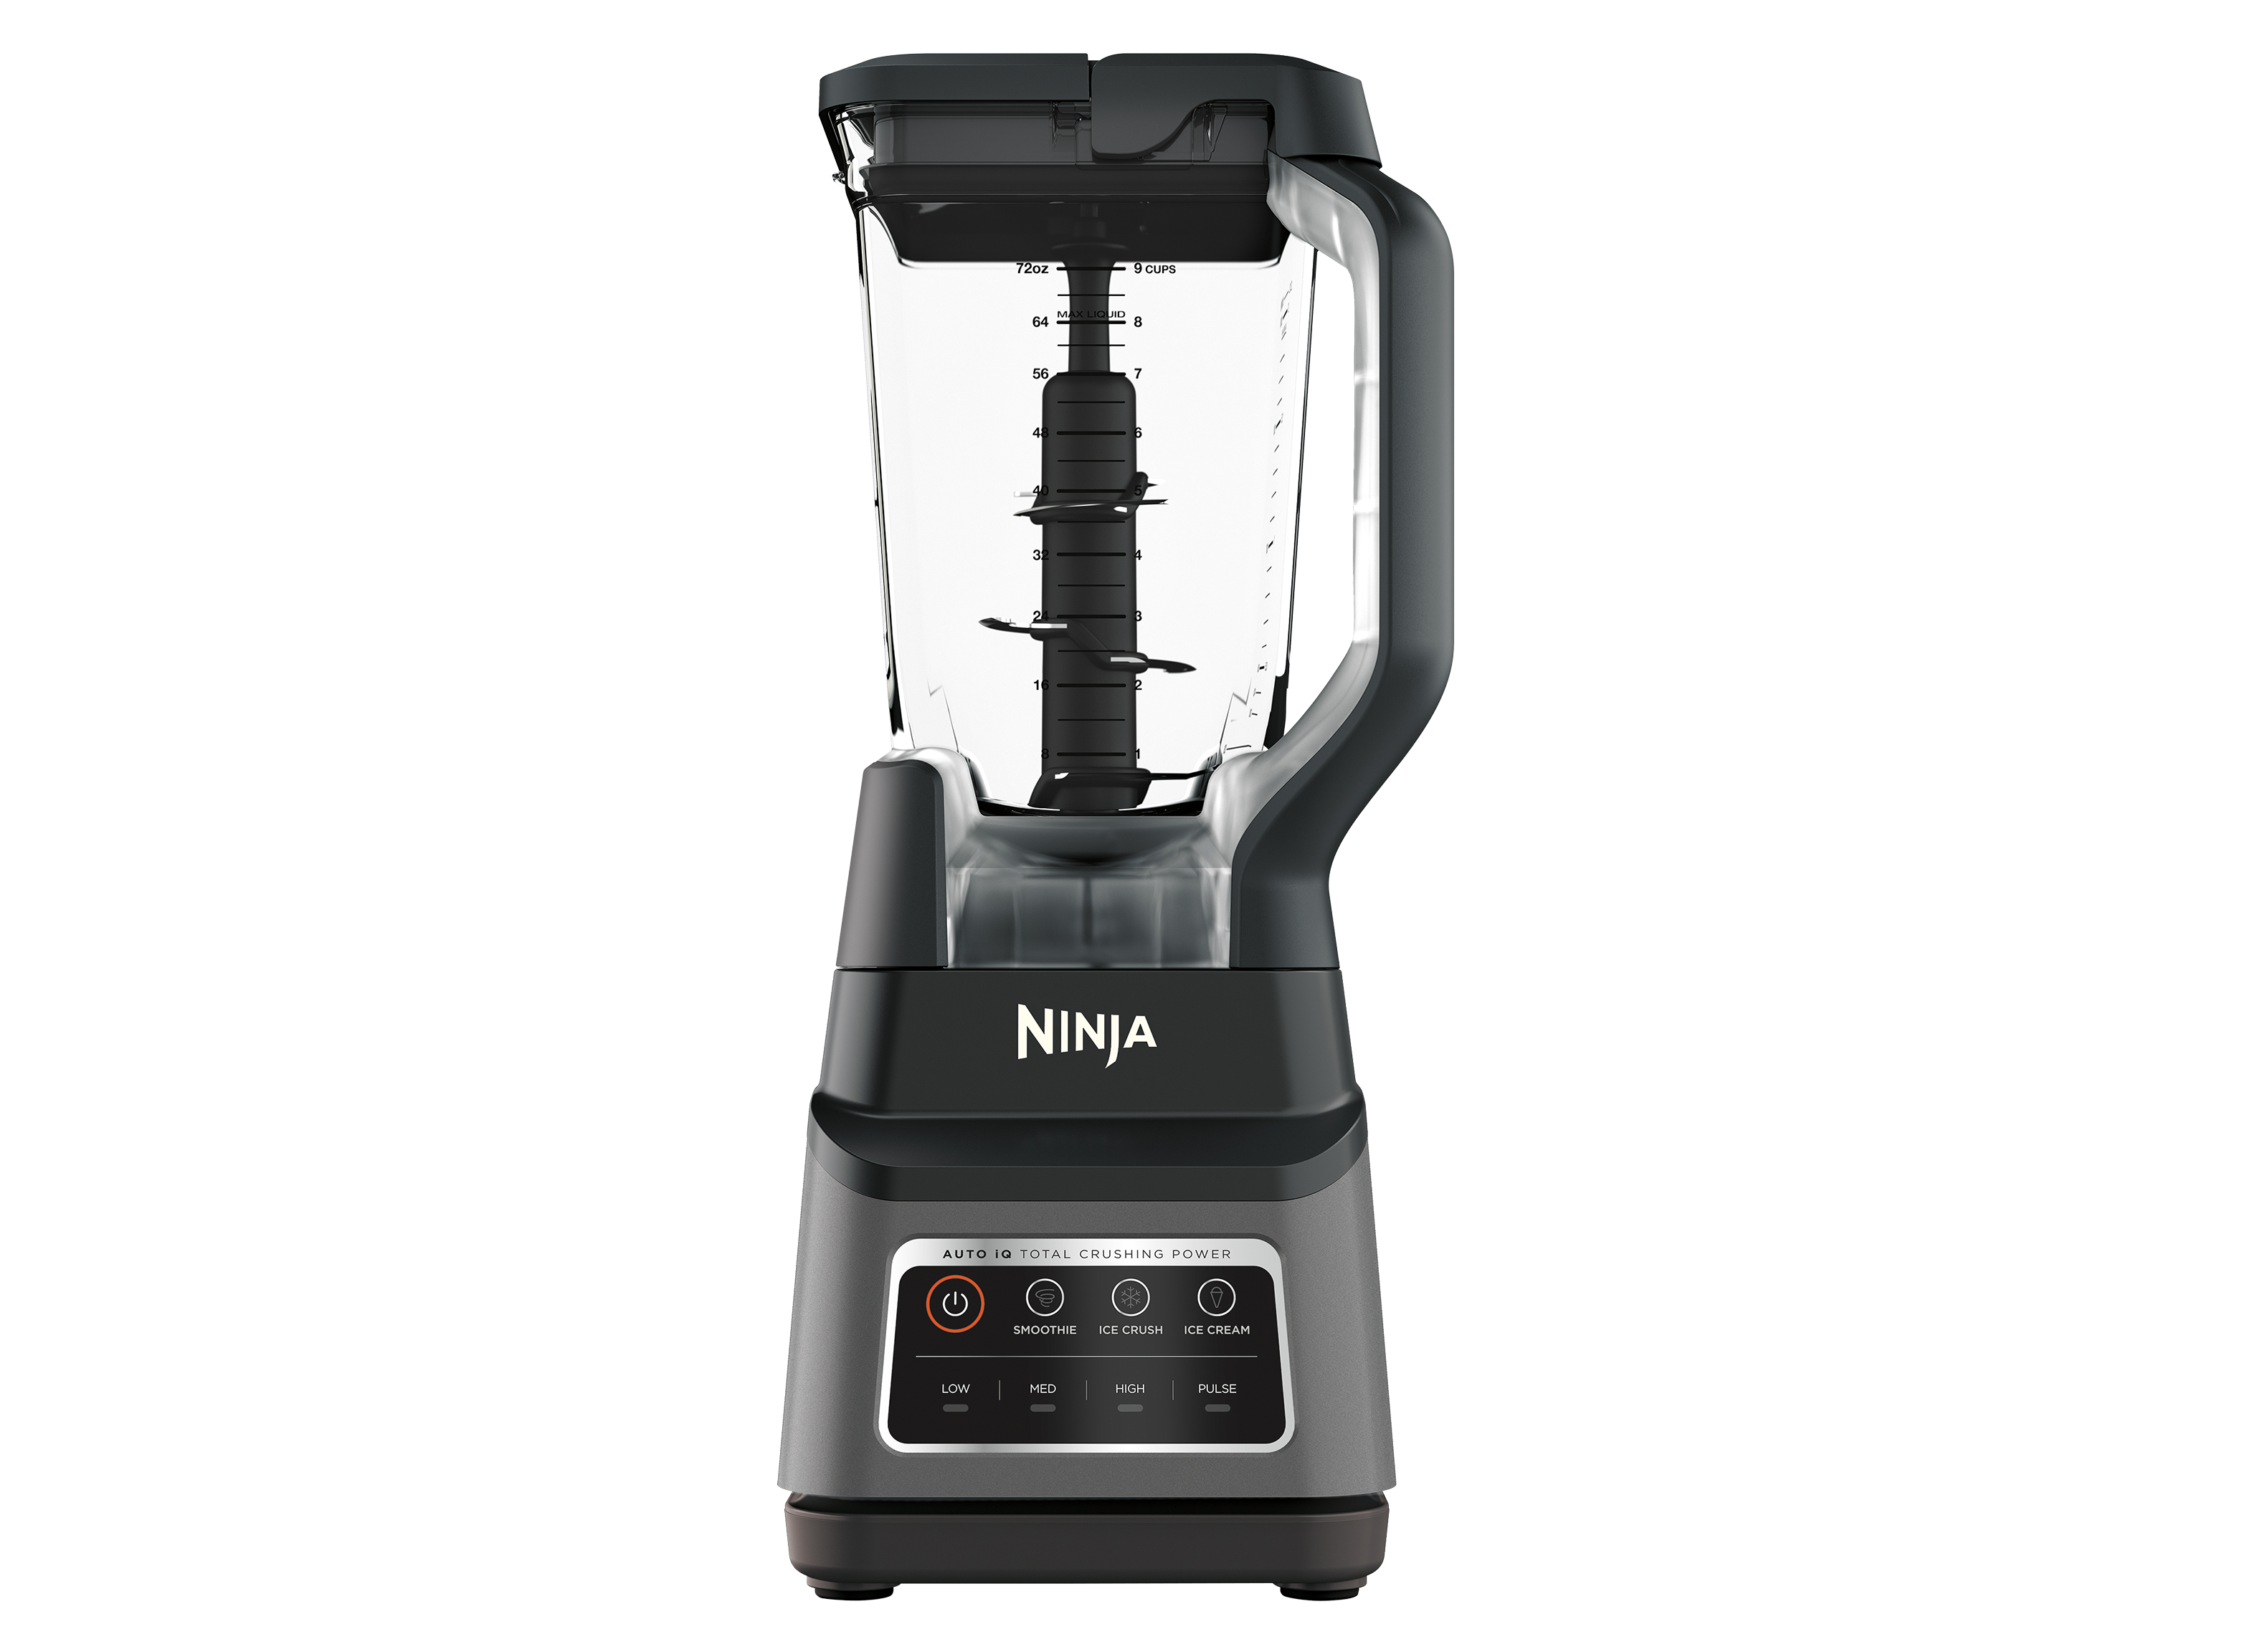 https://crdms.images.consumerreports.org/prod/products/cr/models/403975-full-sized-blenders-ninja-bn701-professional-plus-with-auto-iq-10020917.png